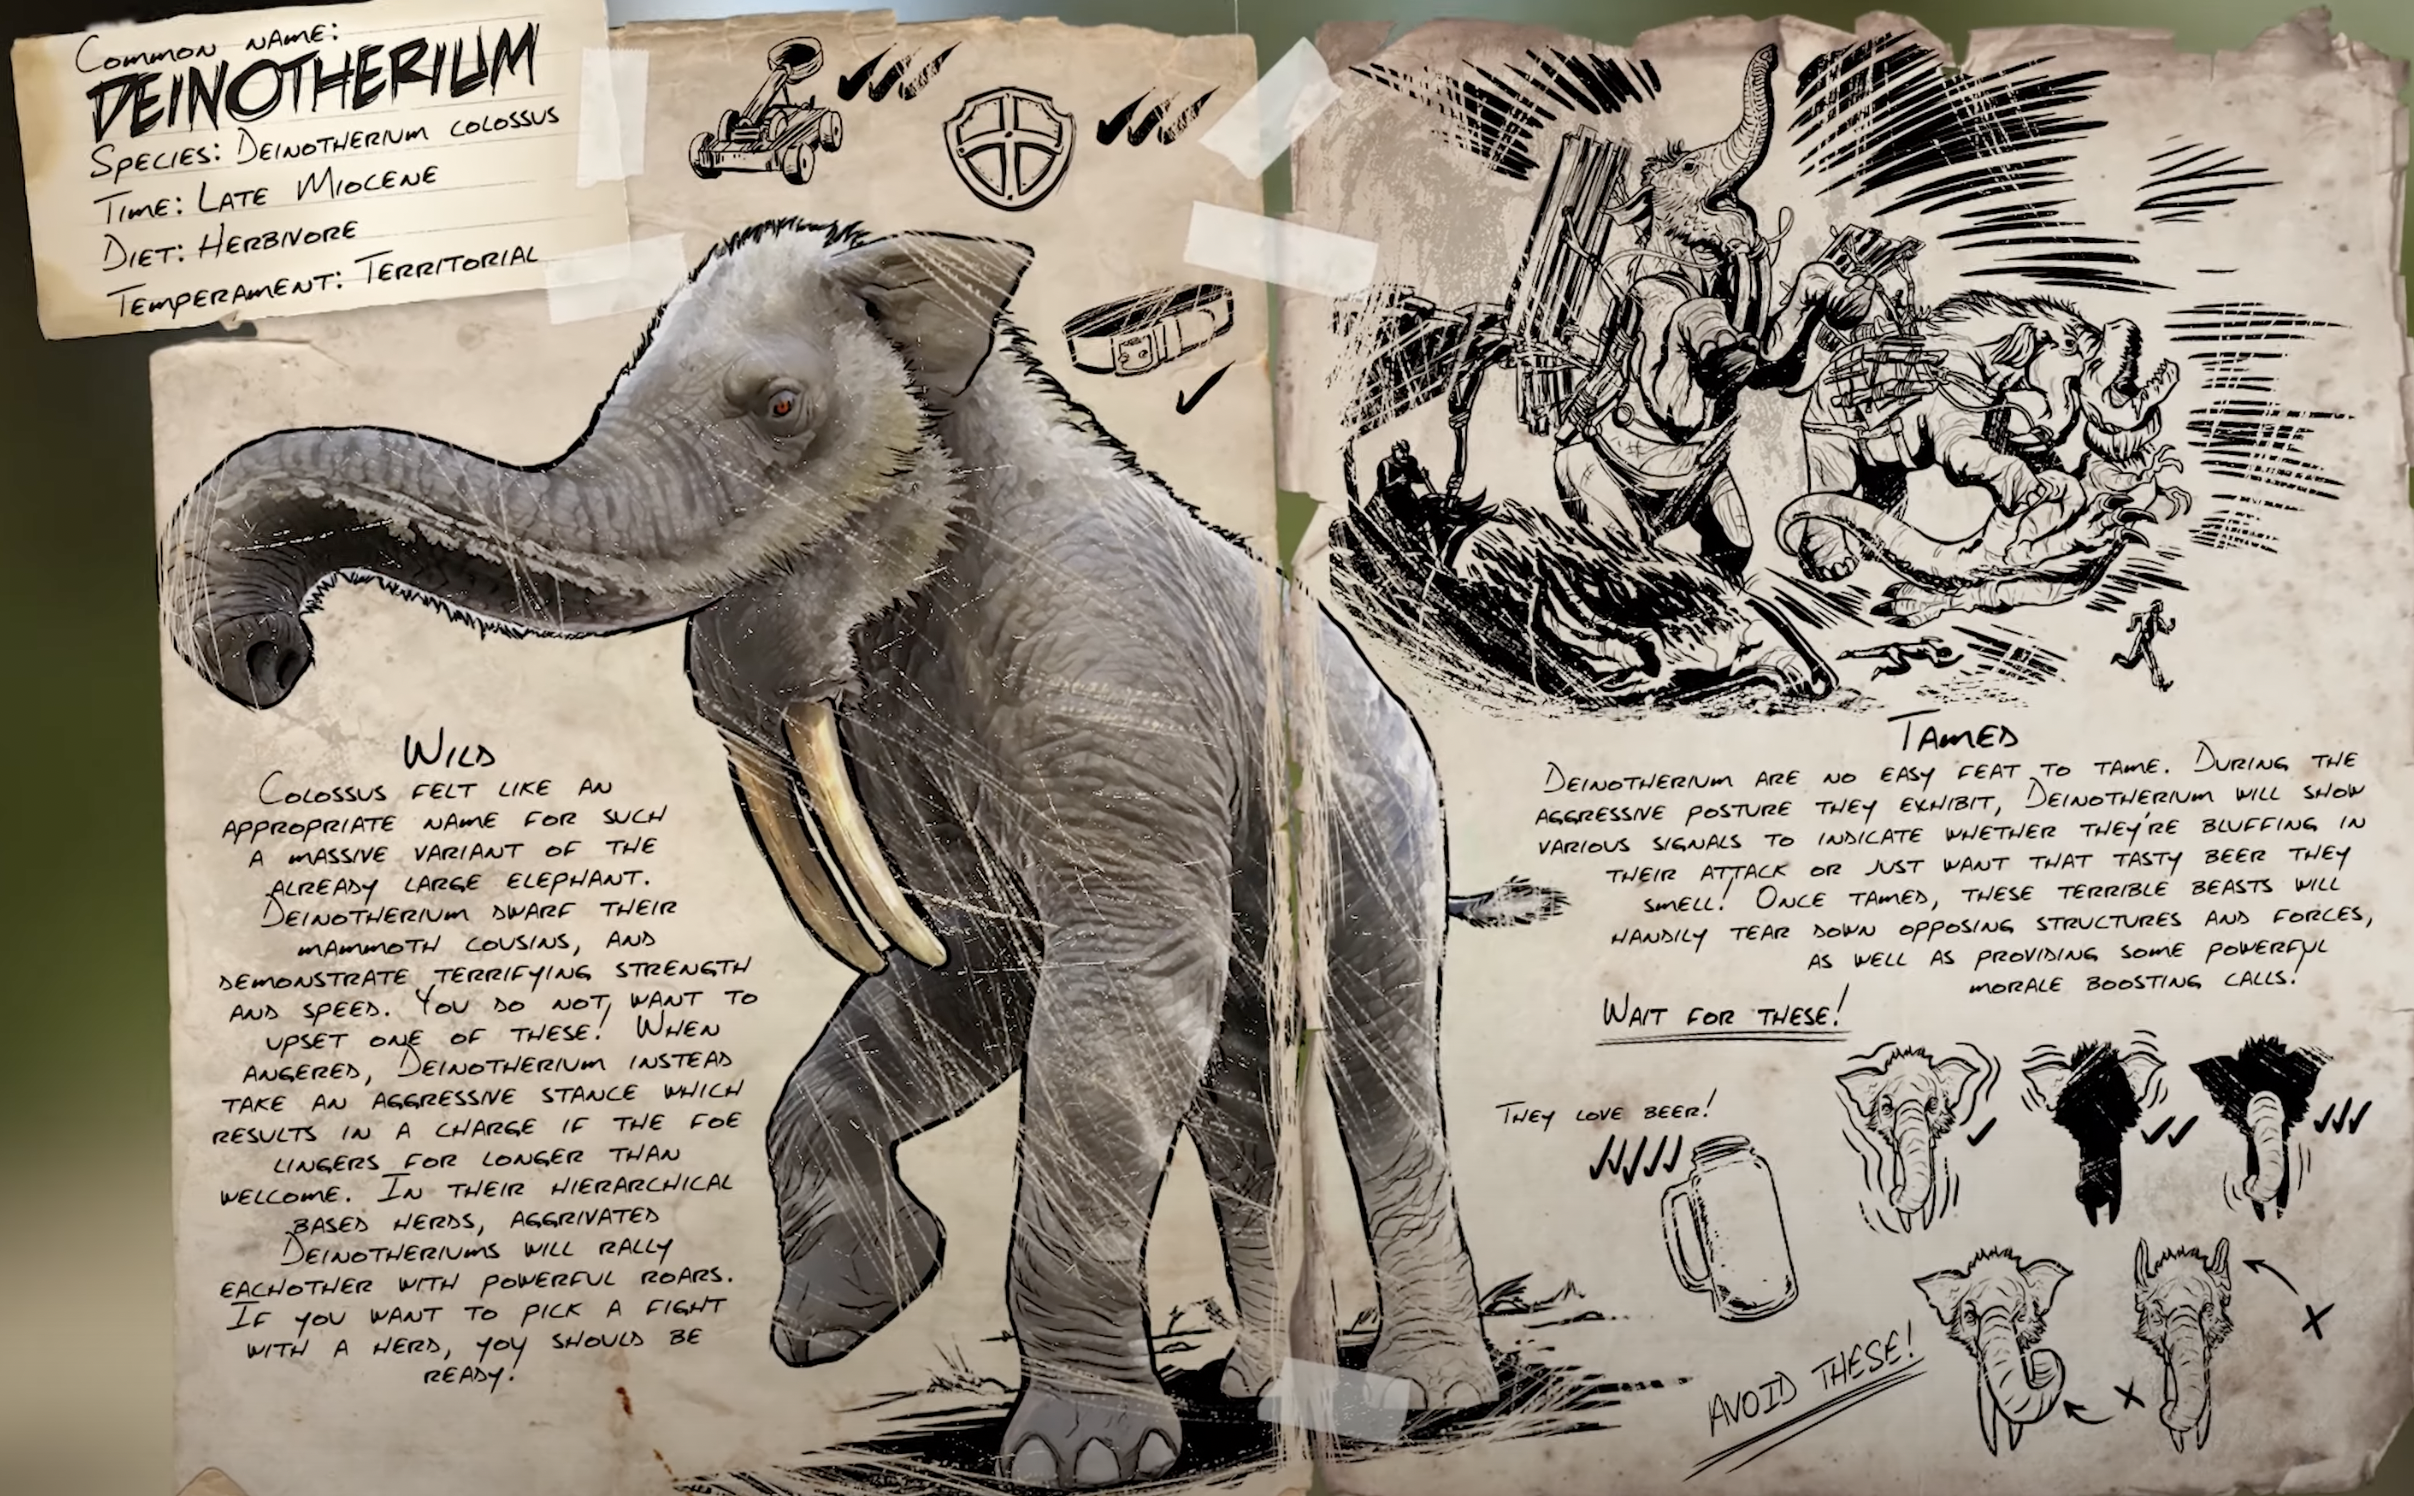 An Ultimate Guide to Deinotherium: The Terrible Beast